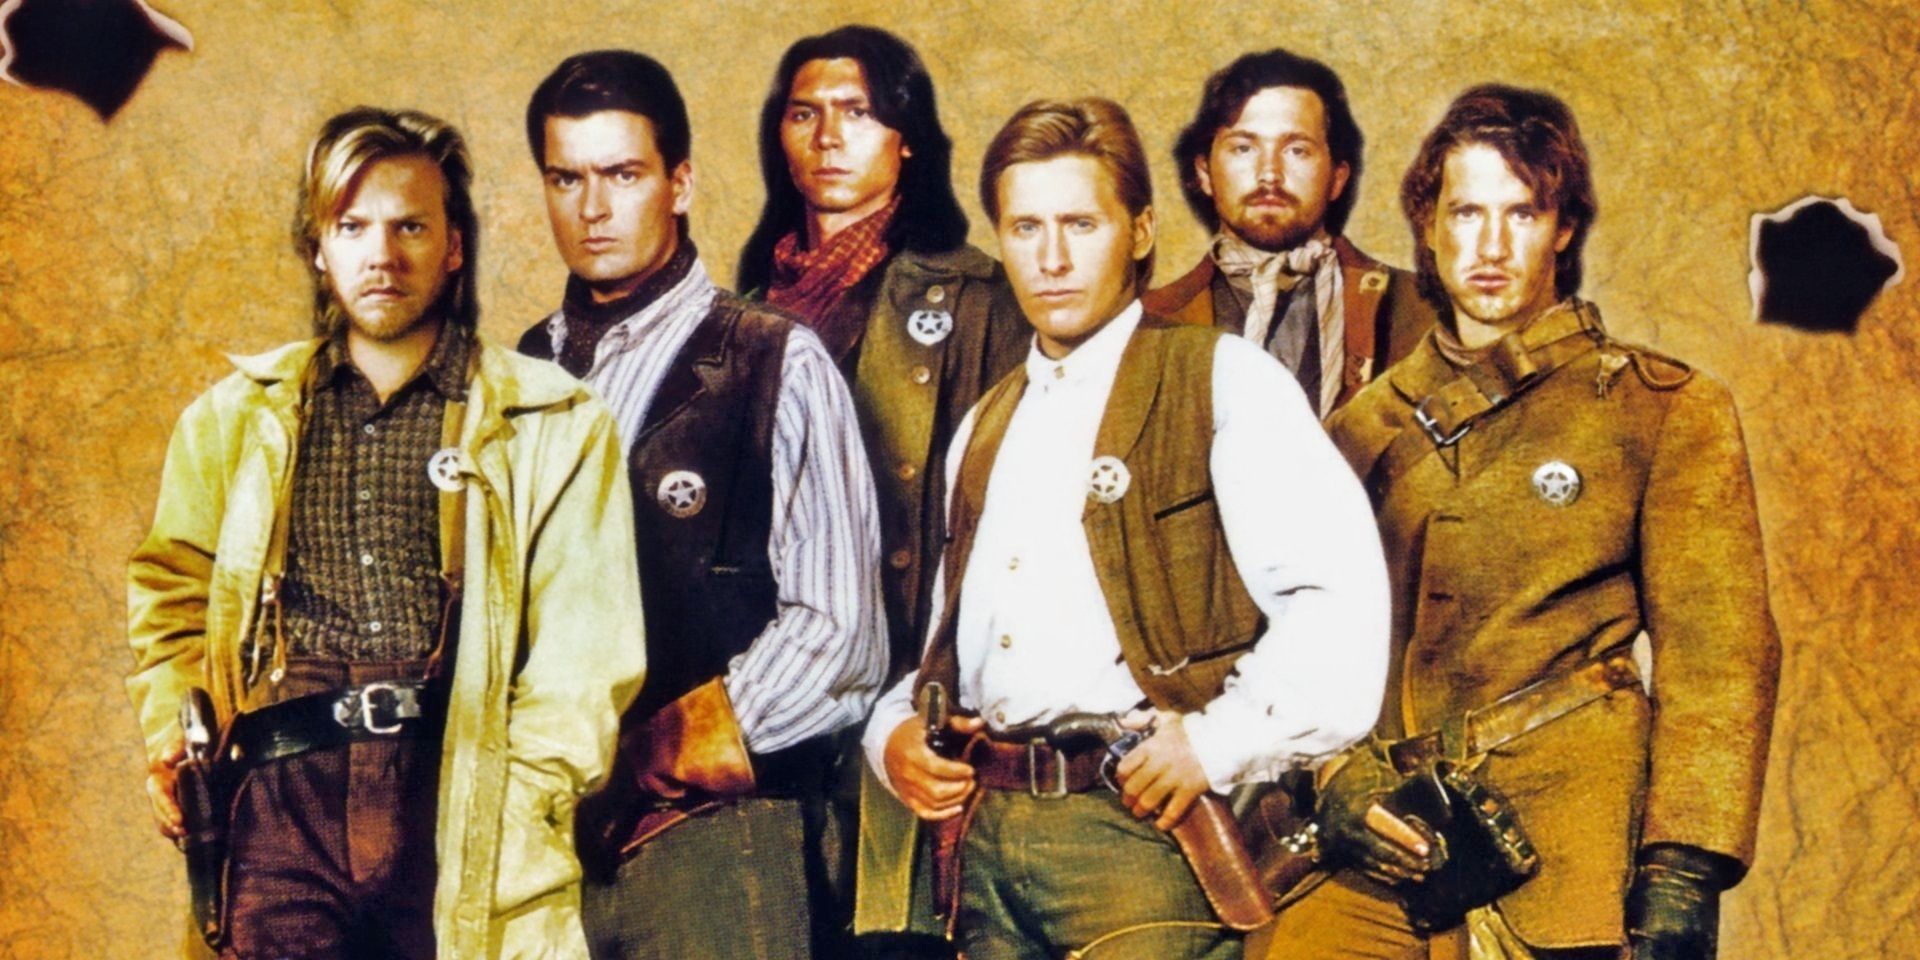 The cast of 1988's Young Guns